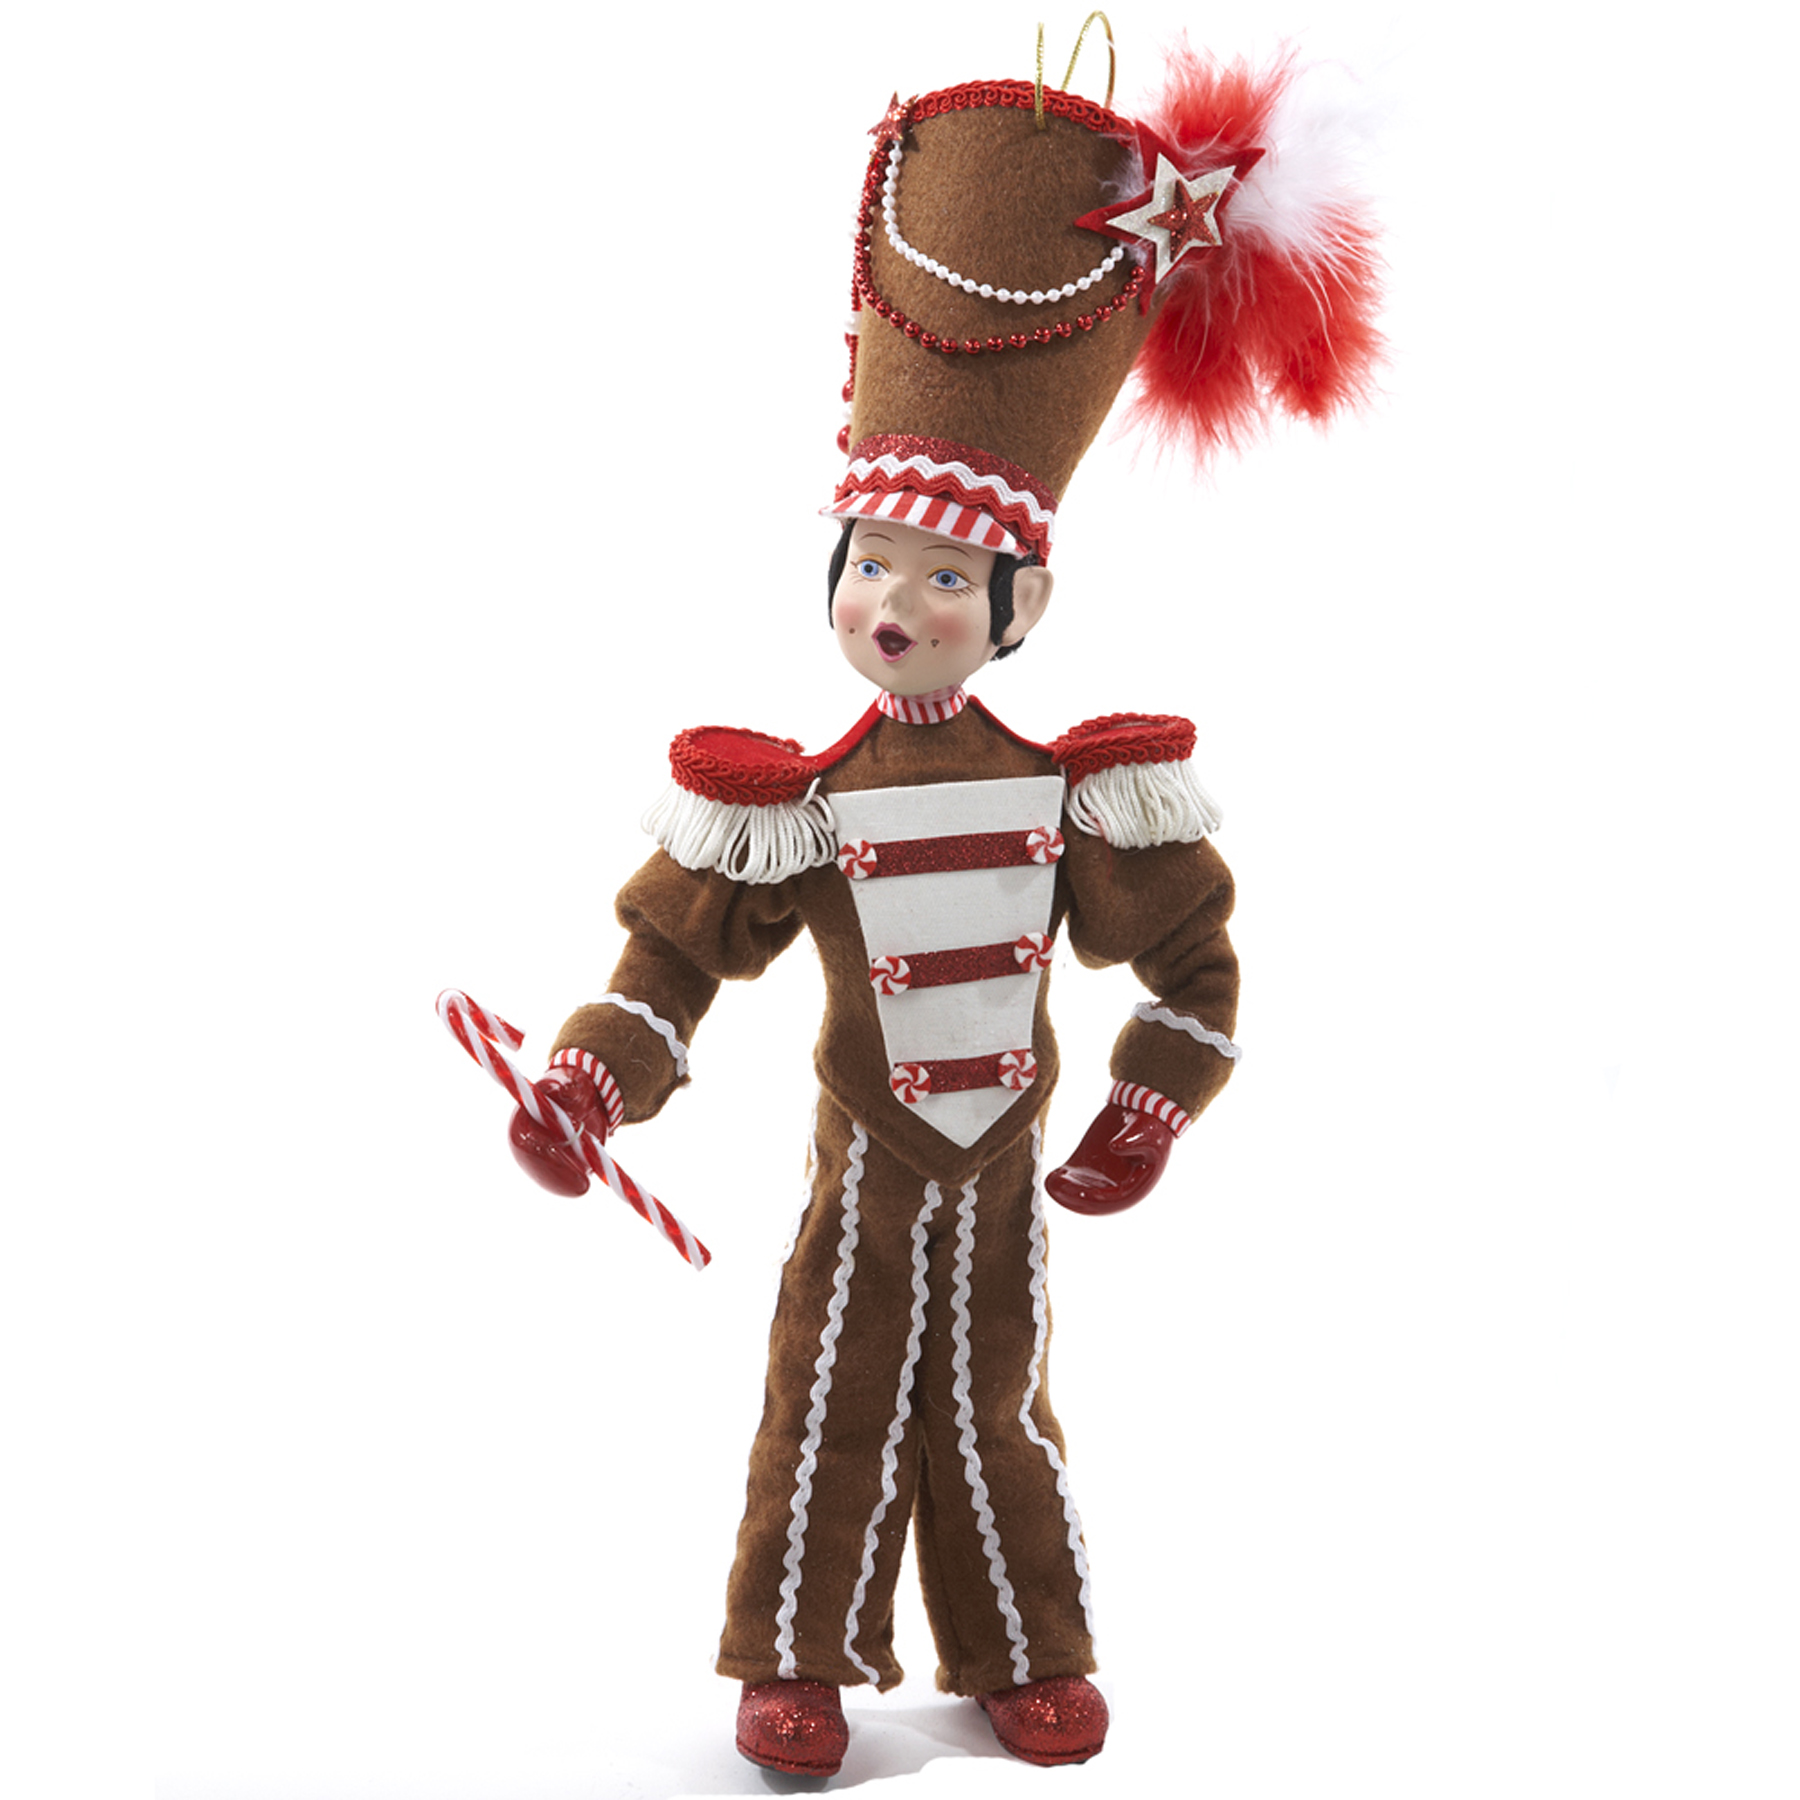 15.5" Gingerbread Soldier Pixie Ornament